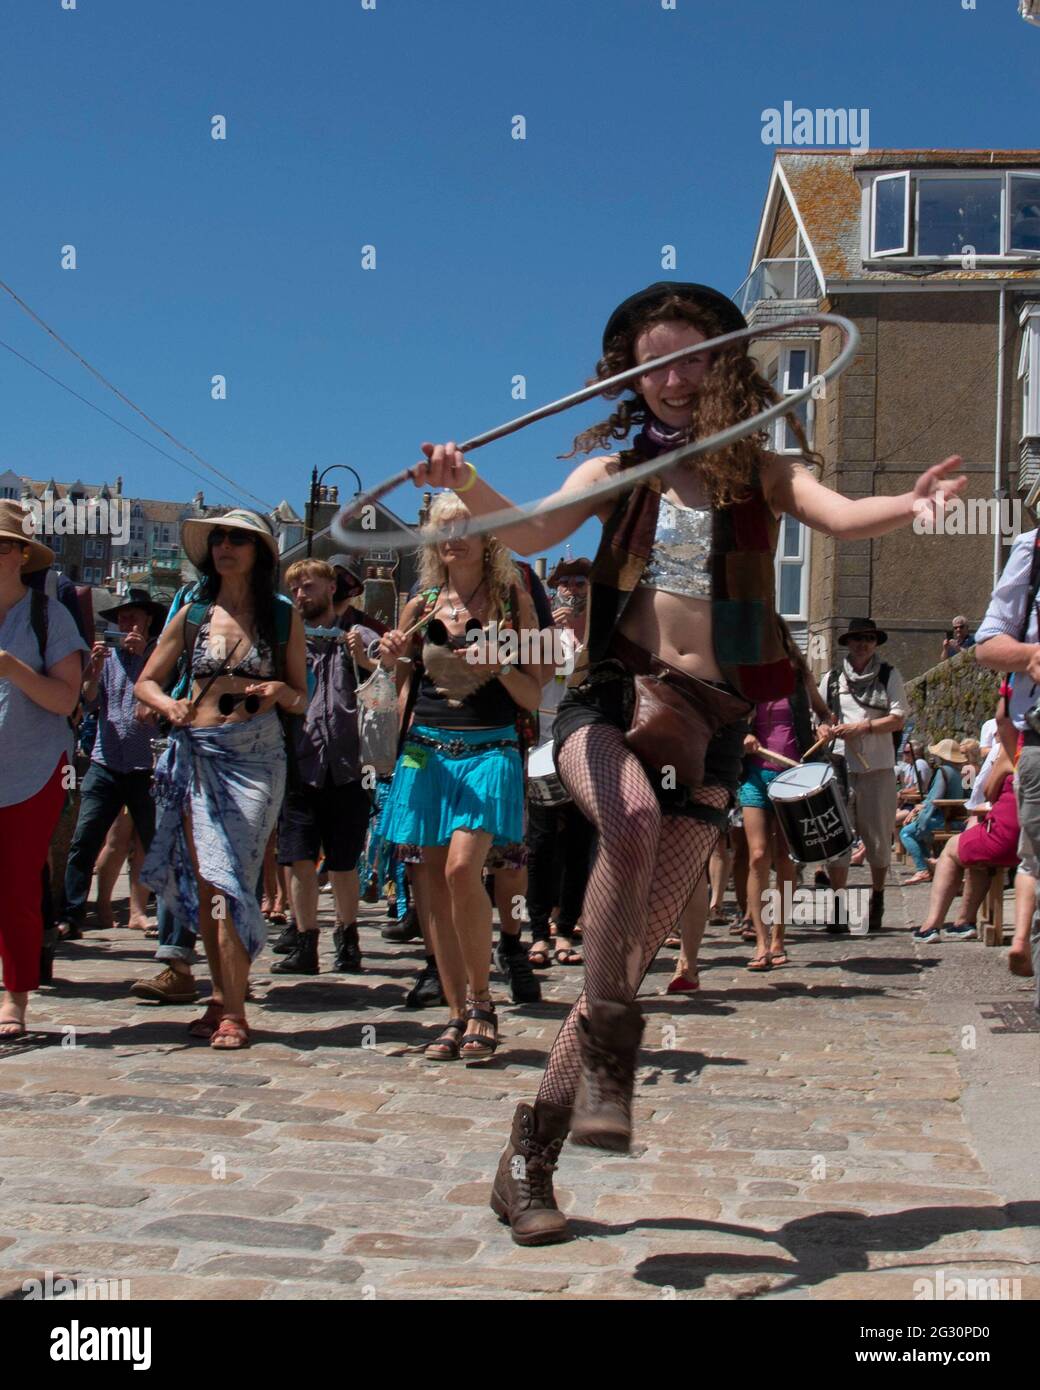 St Ives, Cornwall, UK. 13th June, 2021. An Extinction Rebellion samba band makes their way into St Ives harbour for the last day of the G7 summit in Crabis bay, just around the corner. The samba band is accompanied by a girl with a hula hoop, leading the group. Cornwall. 13the June 2021. Anna Hatfield/ Pathos Credit: One Up Top Editorial Images/Alamy Live News Stock Photo